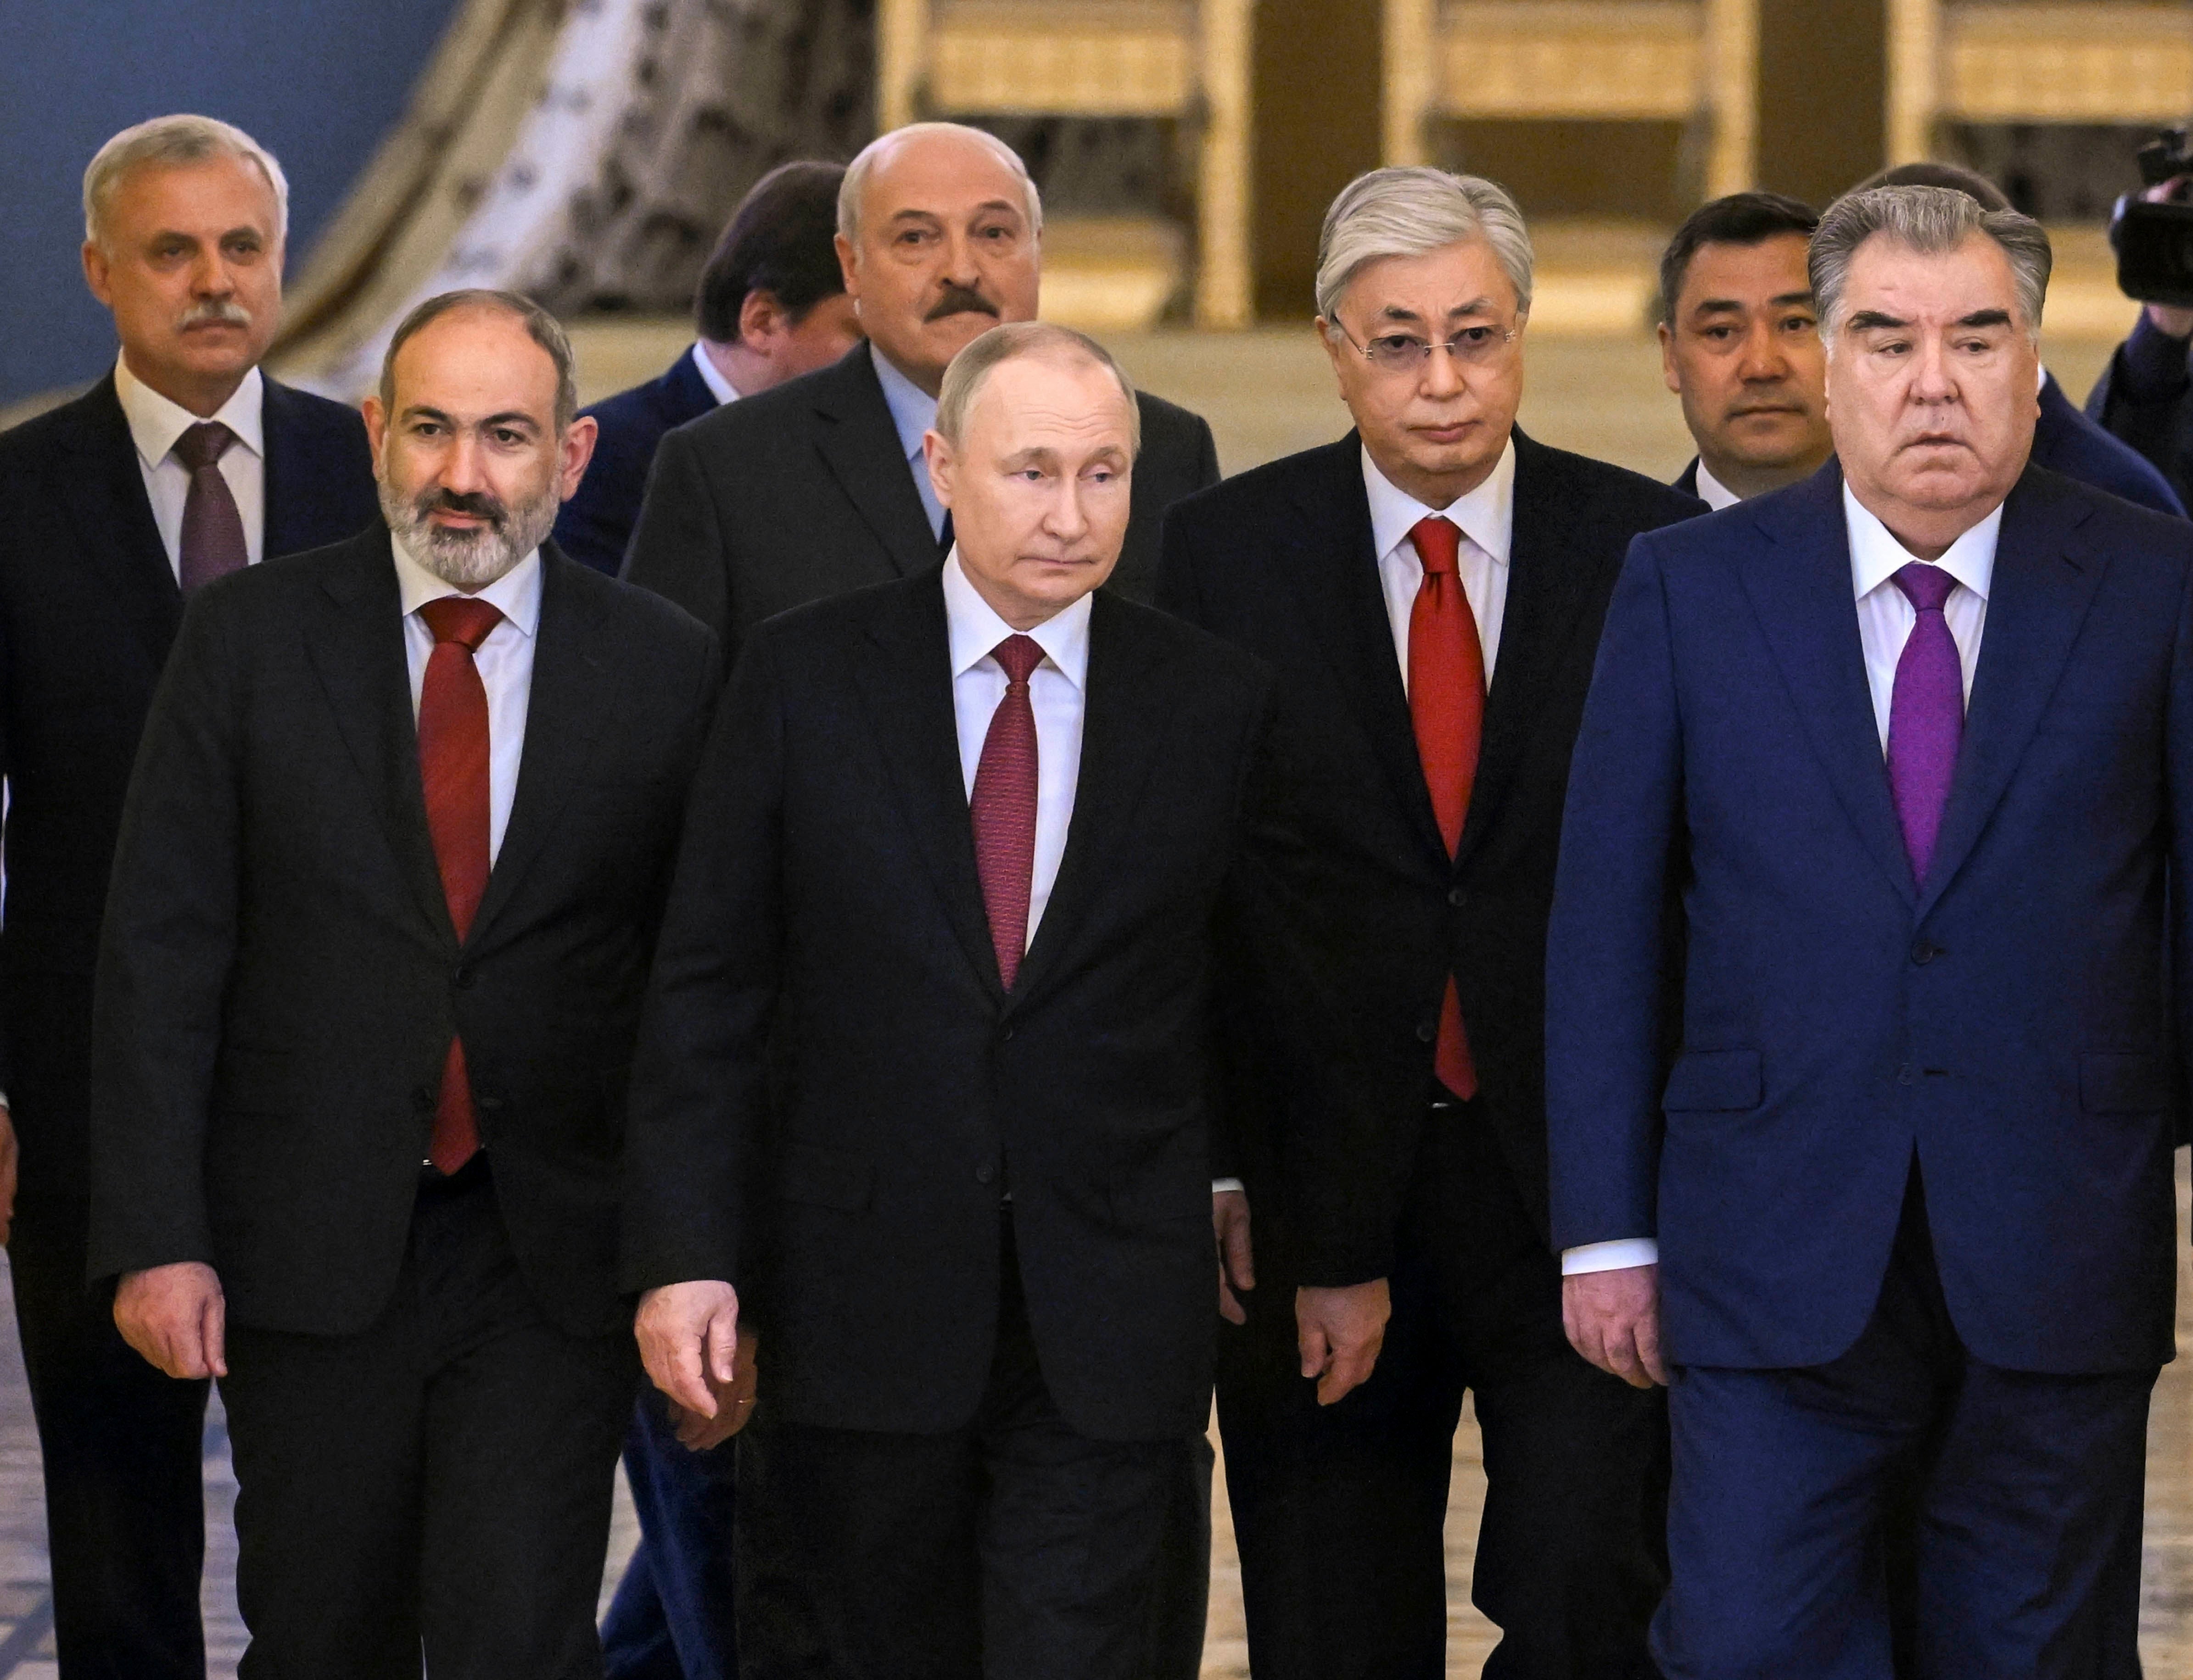 Summit of member states of the Collective Security Treaty Organization (CSTO) at the Kremlin, May 16, 2022.